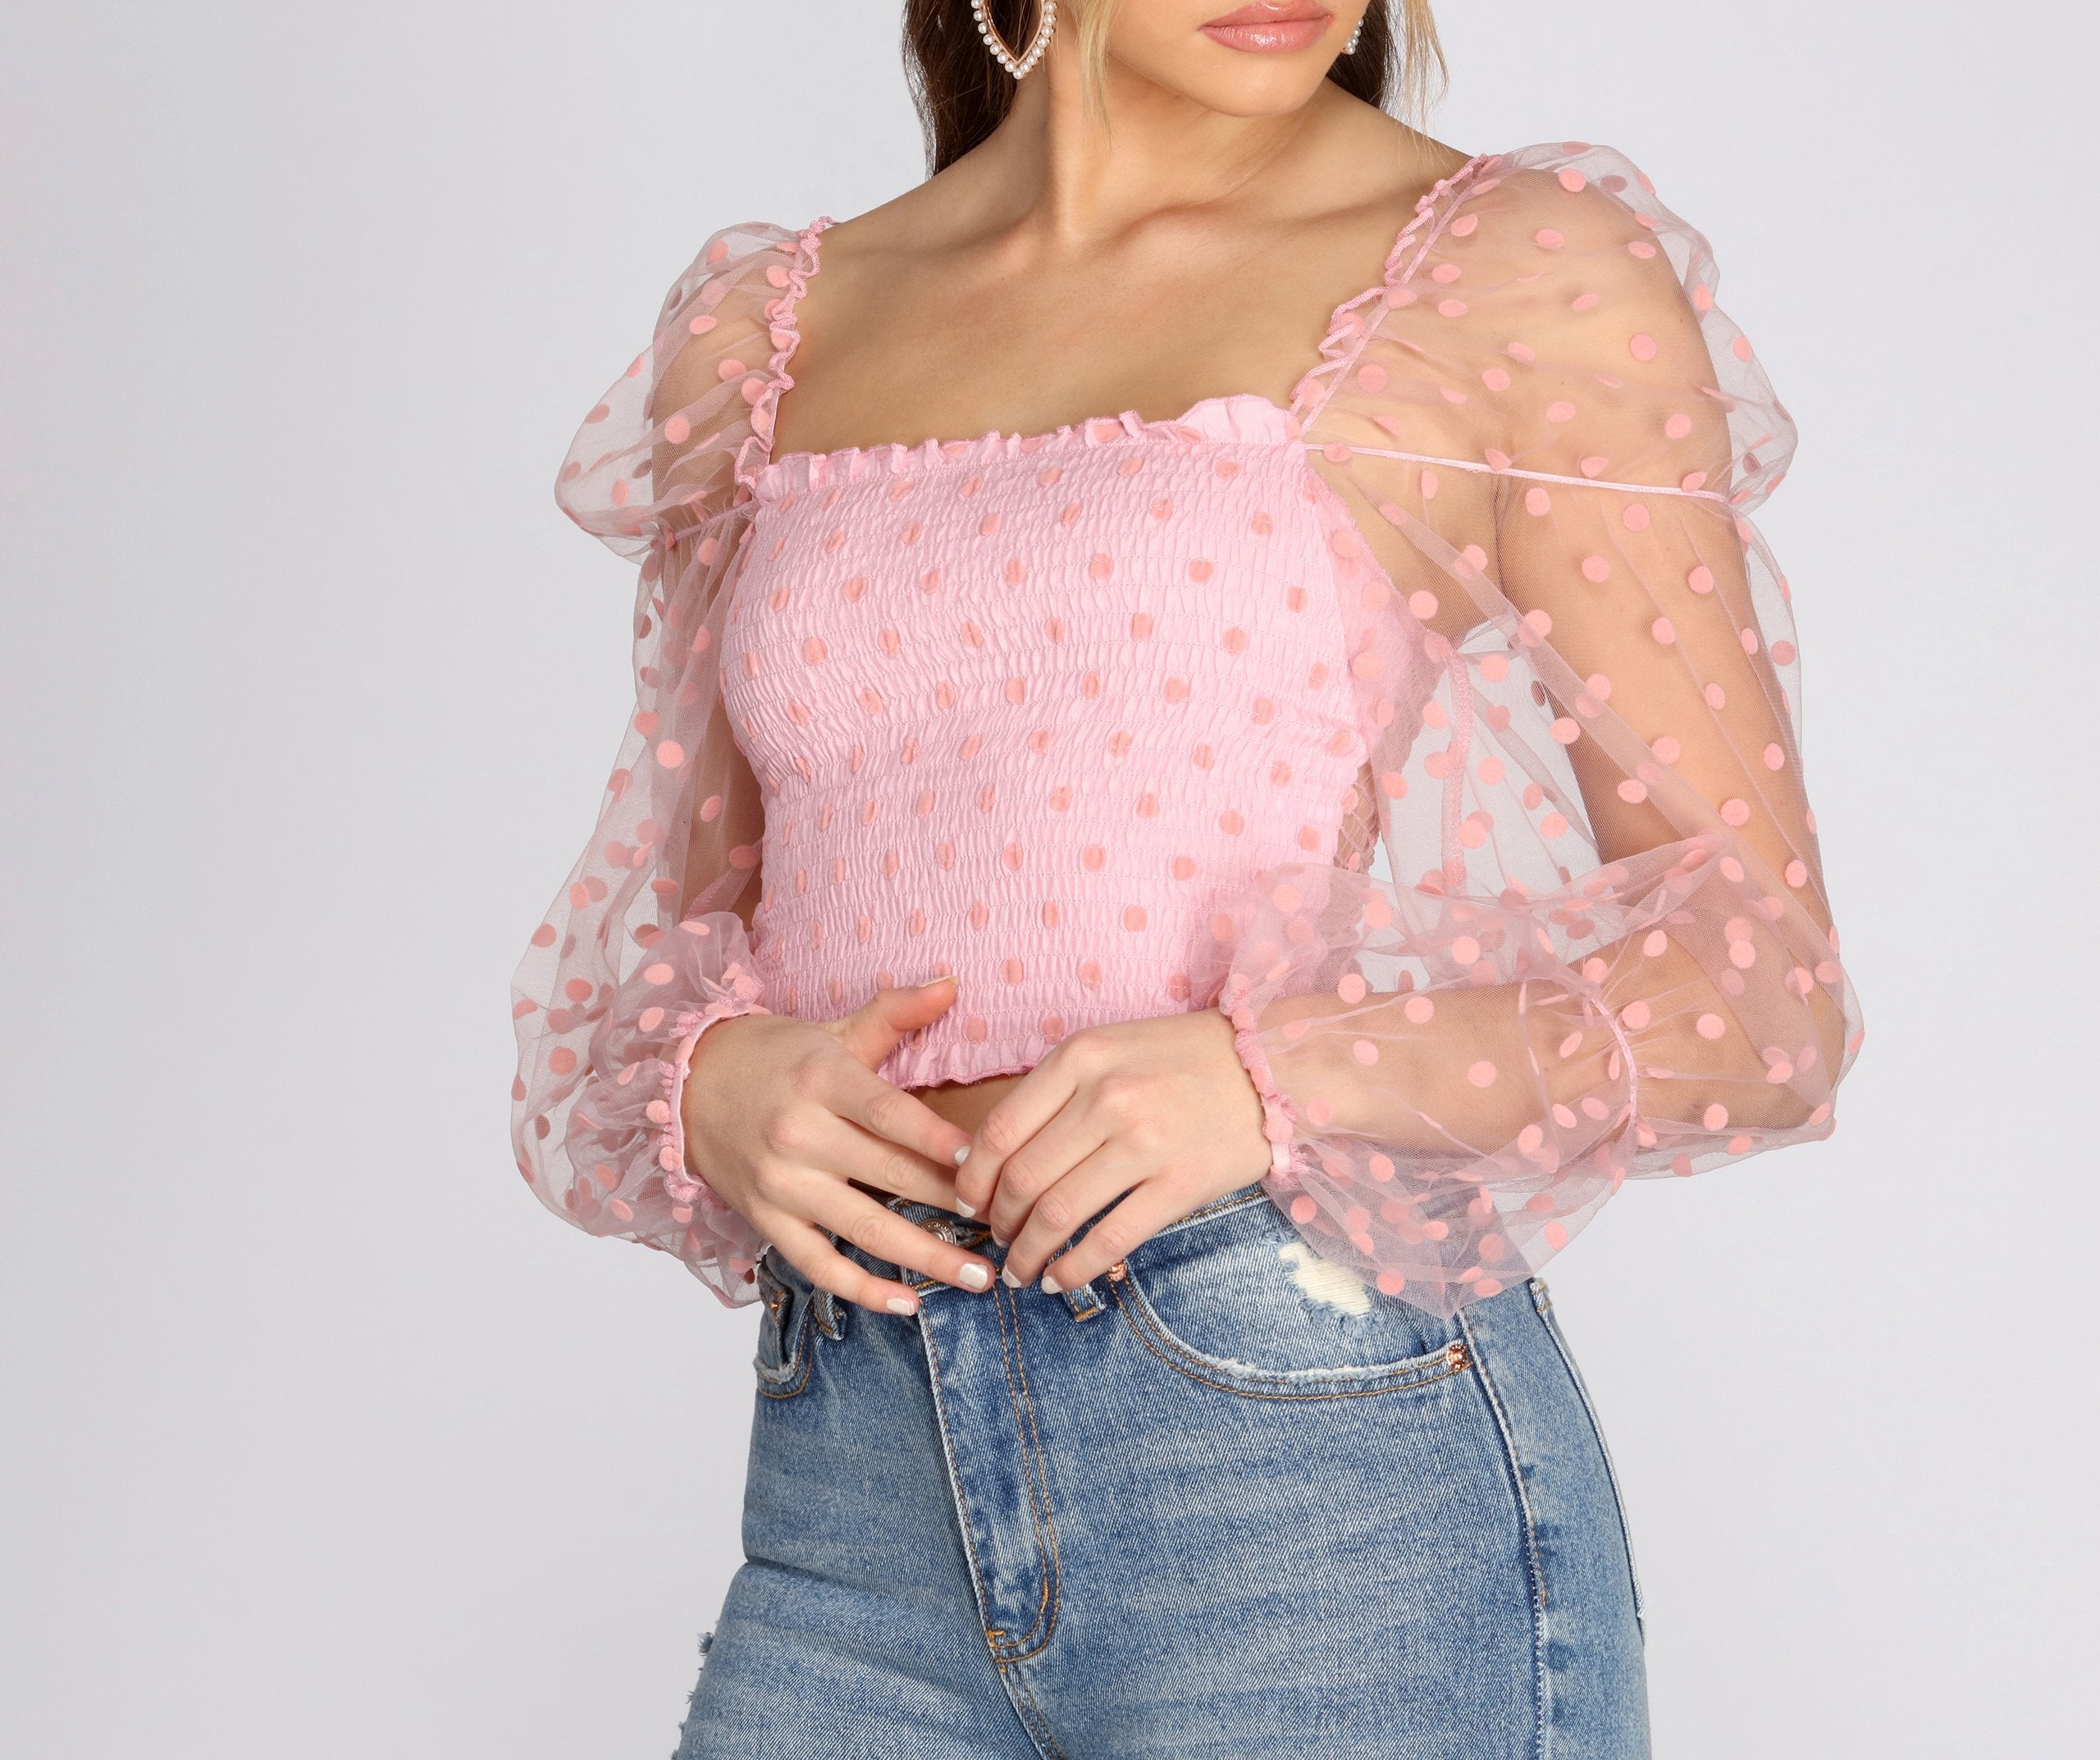 Pretty In Polka Dot Smocked Top - Lady Occasions